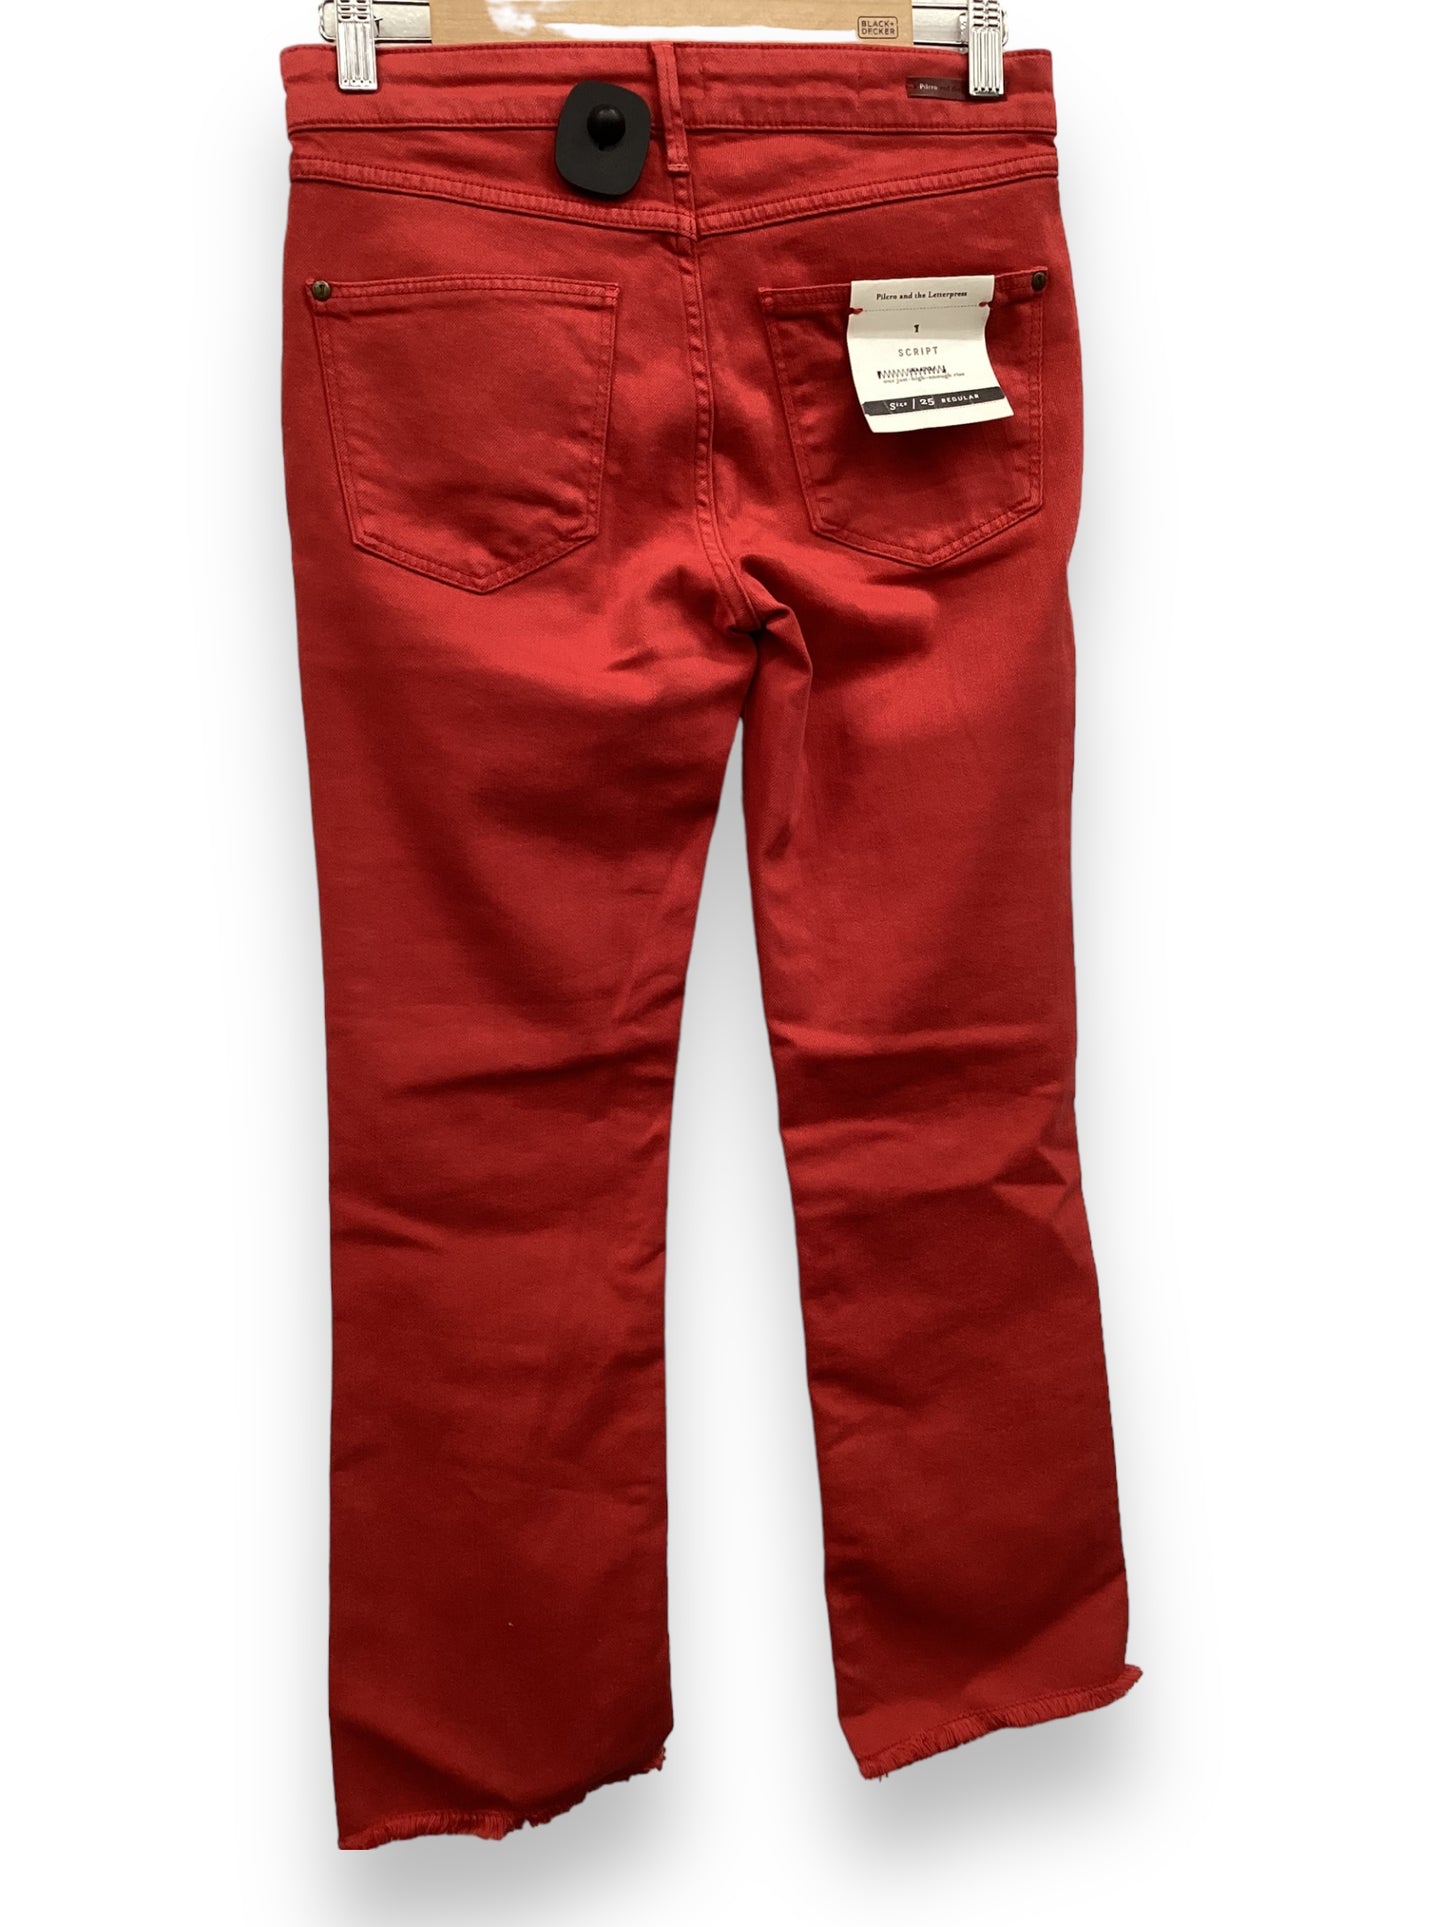 Pants Ankle By Pilcro  Size: 2